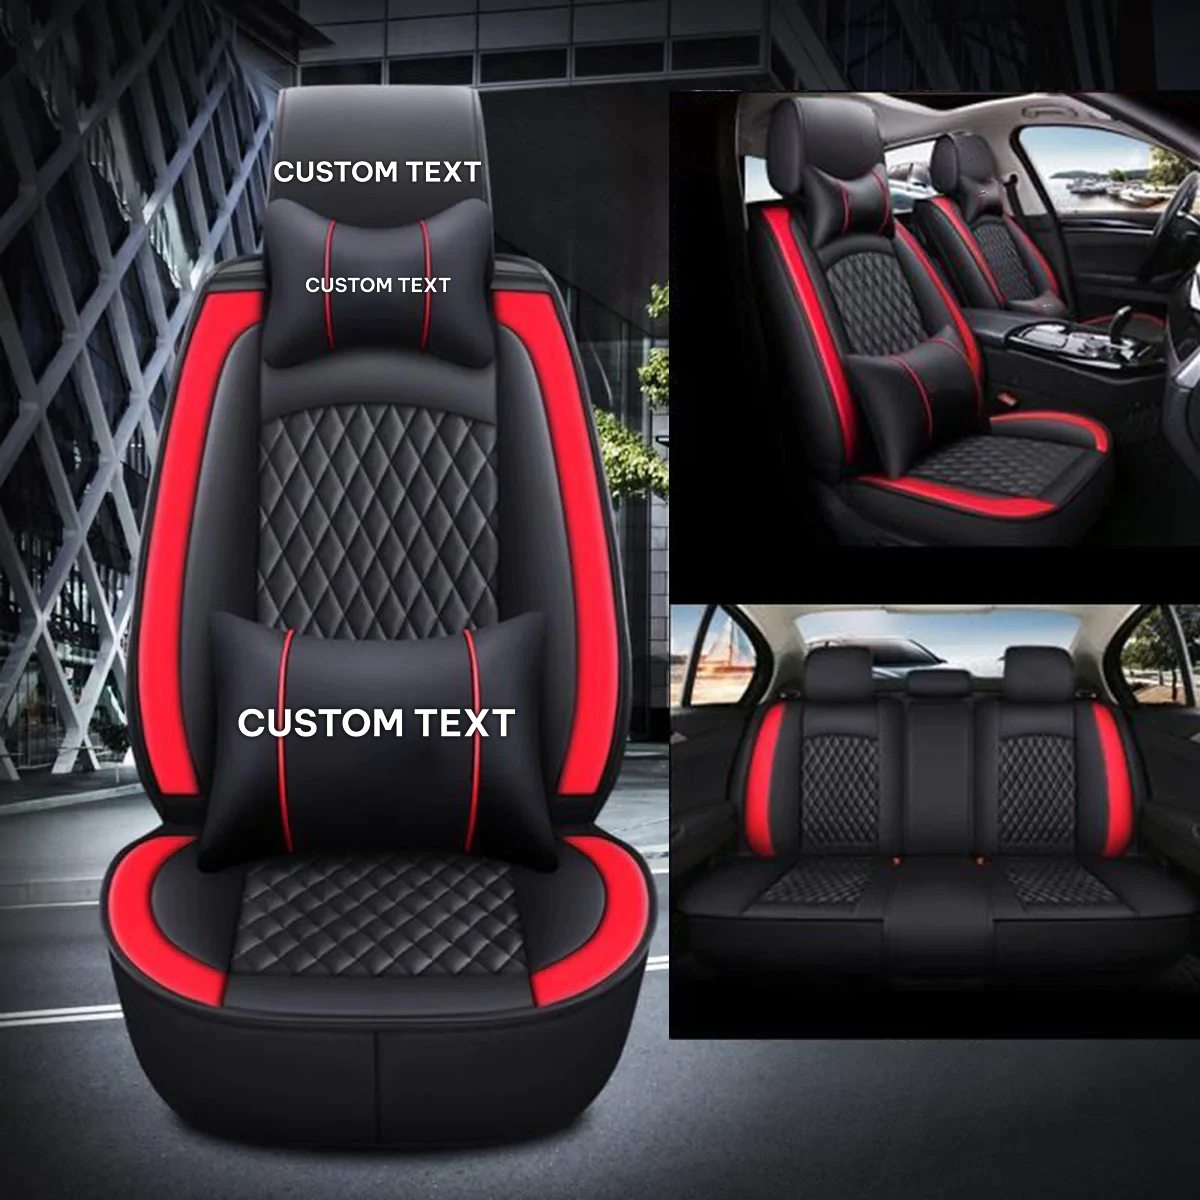 Custom Text For Seat Covers 5 Seats Full Set, Custom Fit For Your Cars, Leatherette Automotive Seat Cushion Protector Universal Fit, Vehicle Auto Interior Decor SU13988